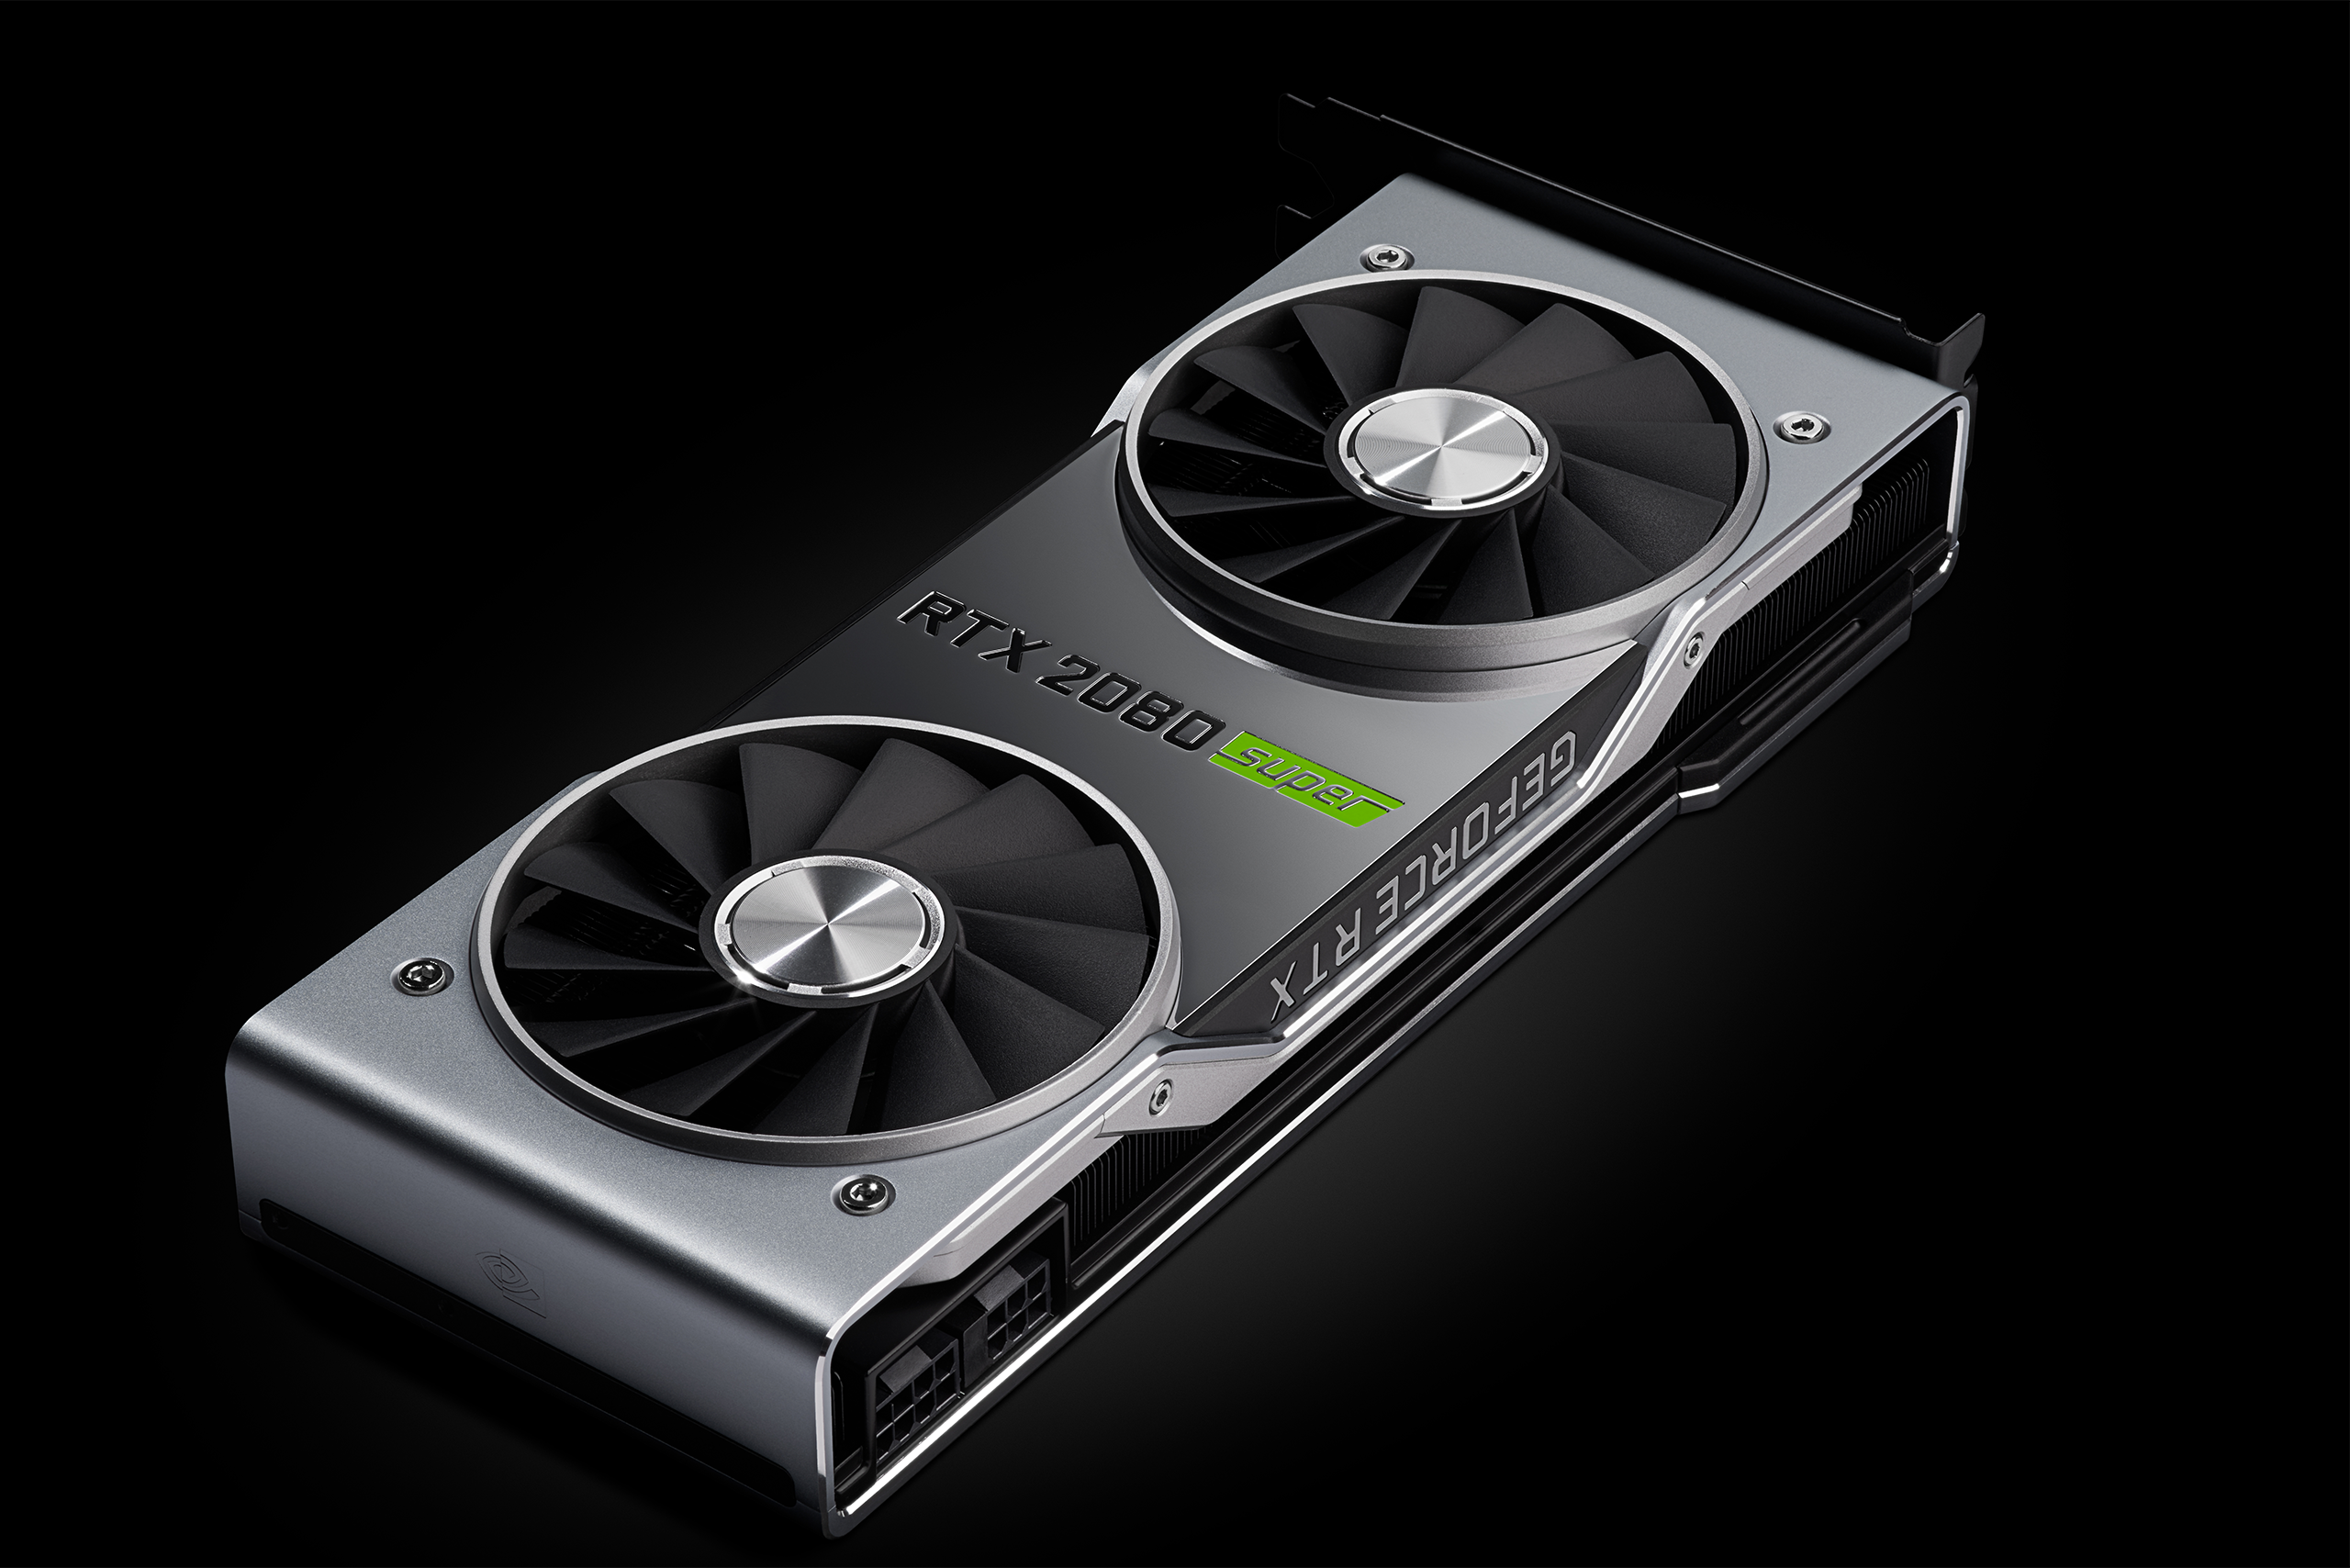 Release of Nvidia GeForce RTX 2080 SUPER graphics card could on AMD - NotebookCheck.net